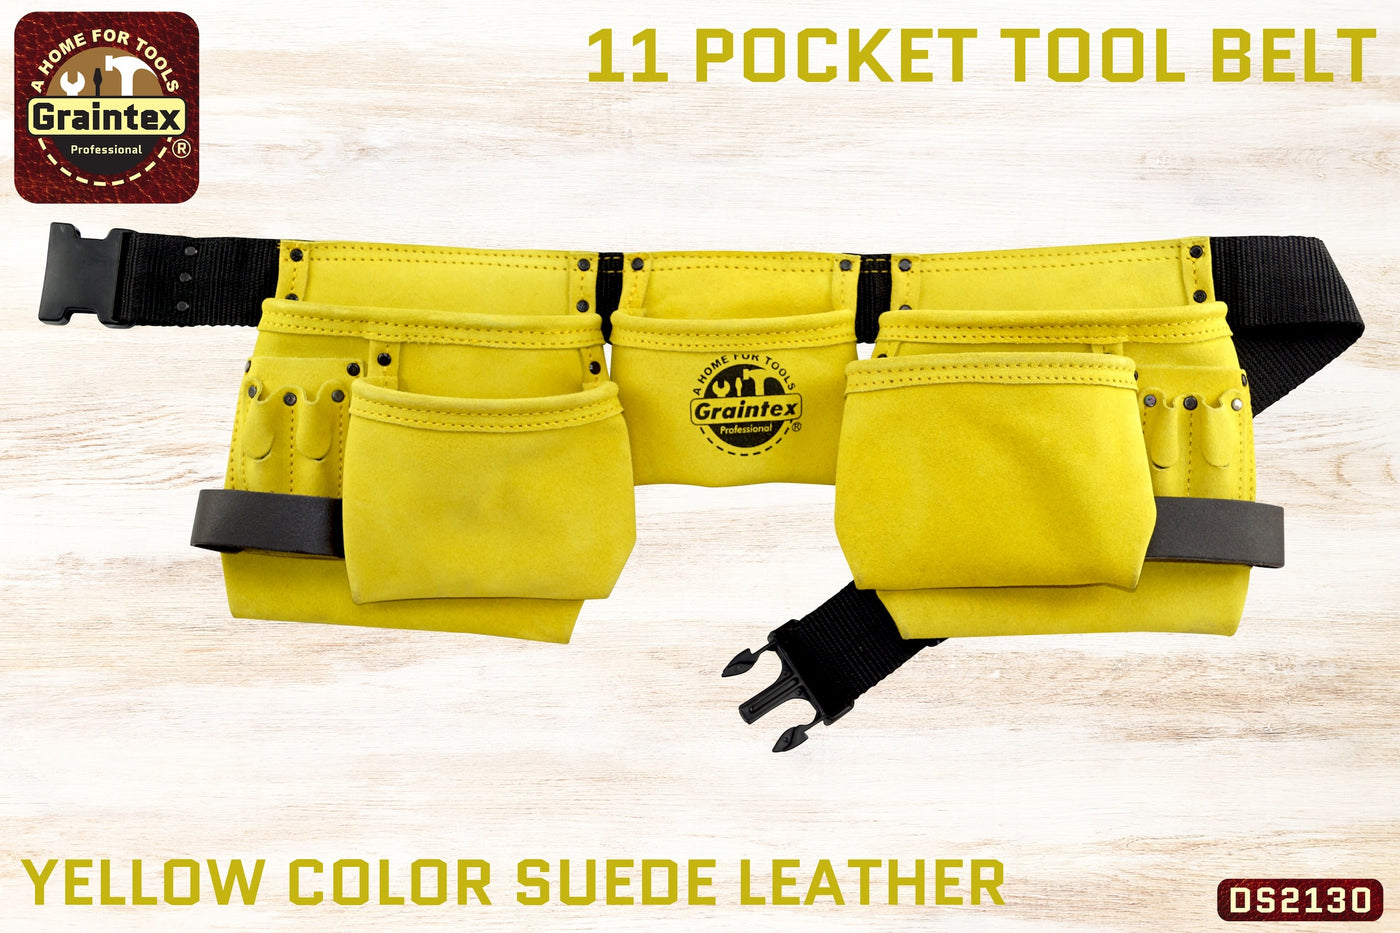 DS2130 :: 11 POCKET TOOL BELT YELLOW COLOR SUEDE LEATHER